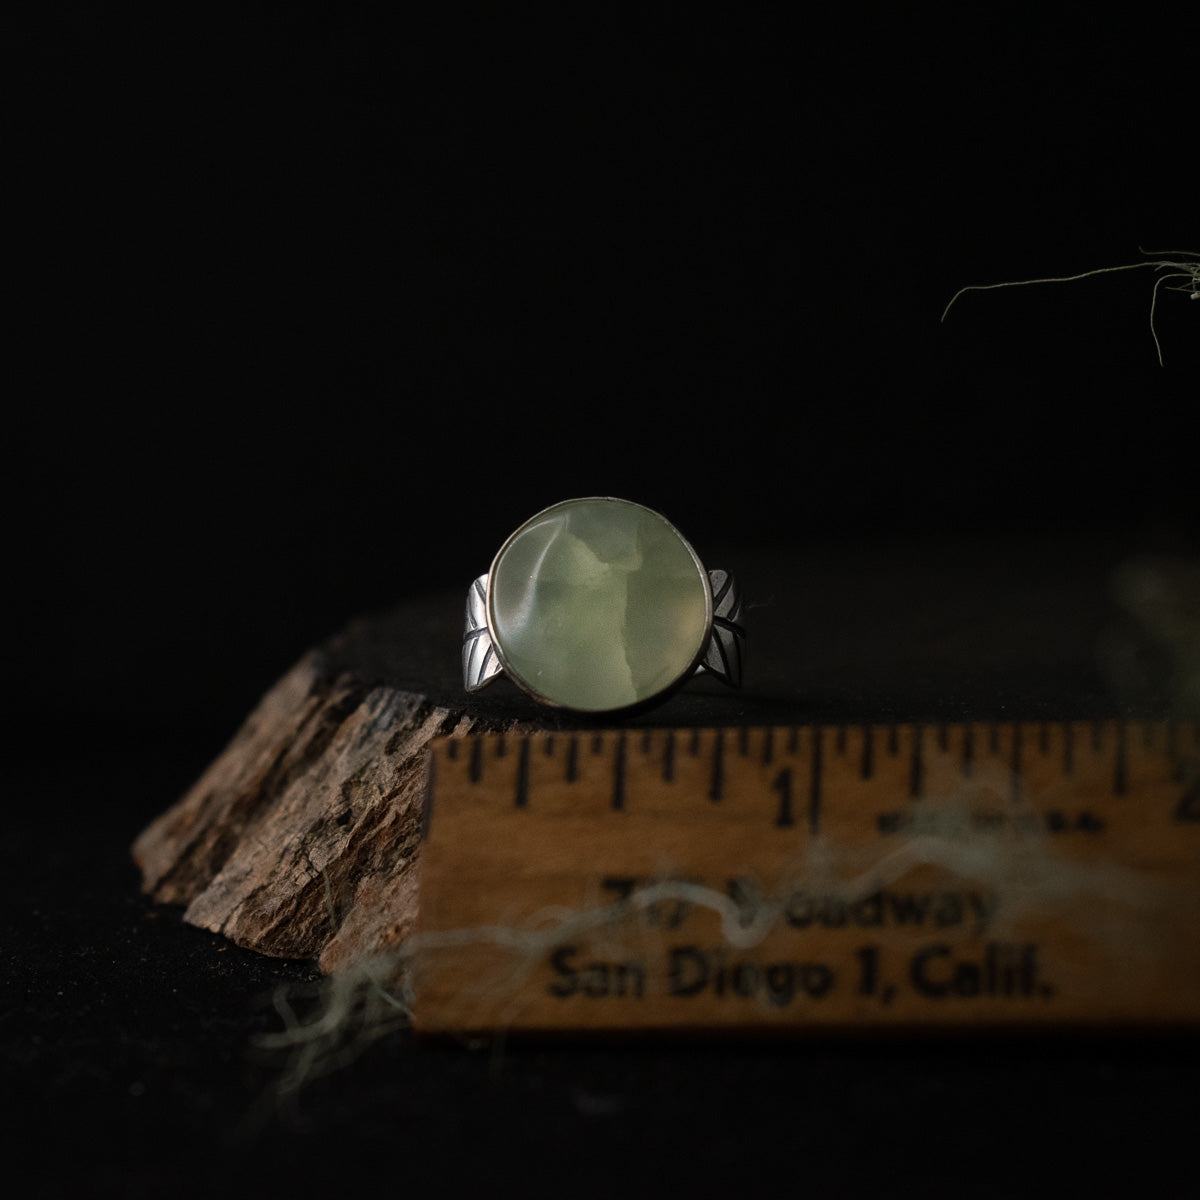 The Prehnite Double Leaf Ring with a ruler for scale, measuring around 3/4 inches wide.